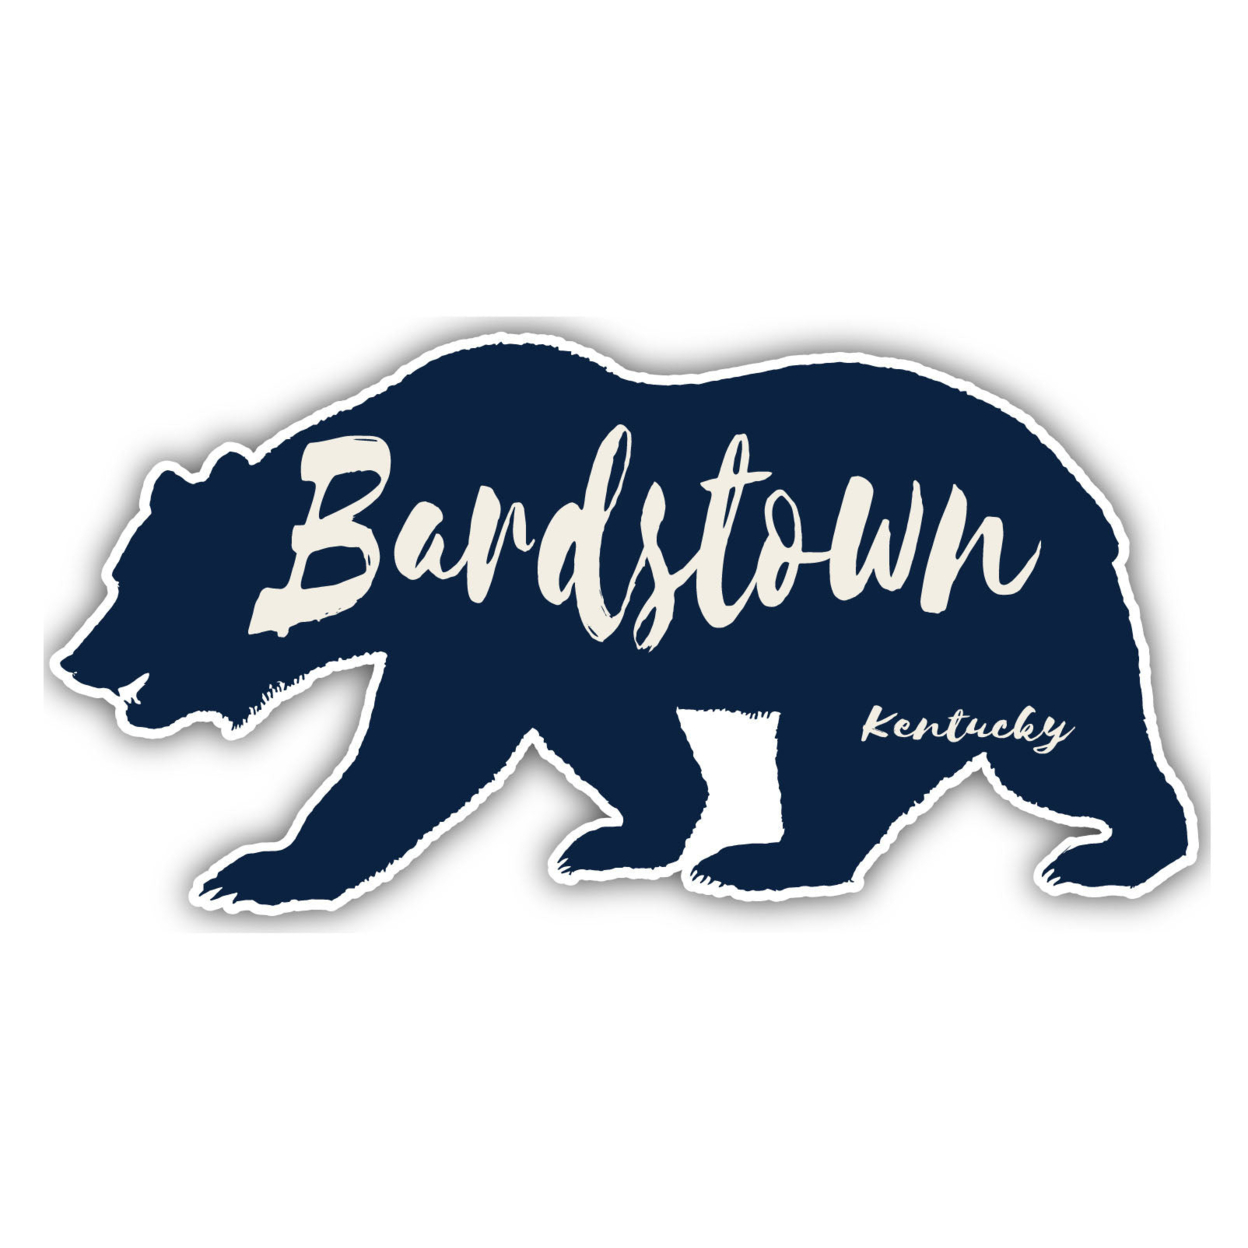 Bardstown Kentucky Souvenir Decorative Stickers (Choose Theme And Size) - 4-Pack, 12-Inch, Bear